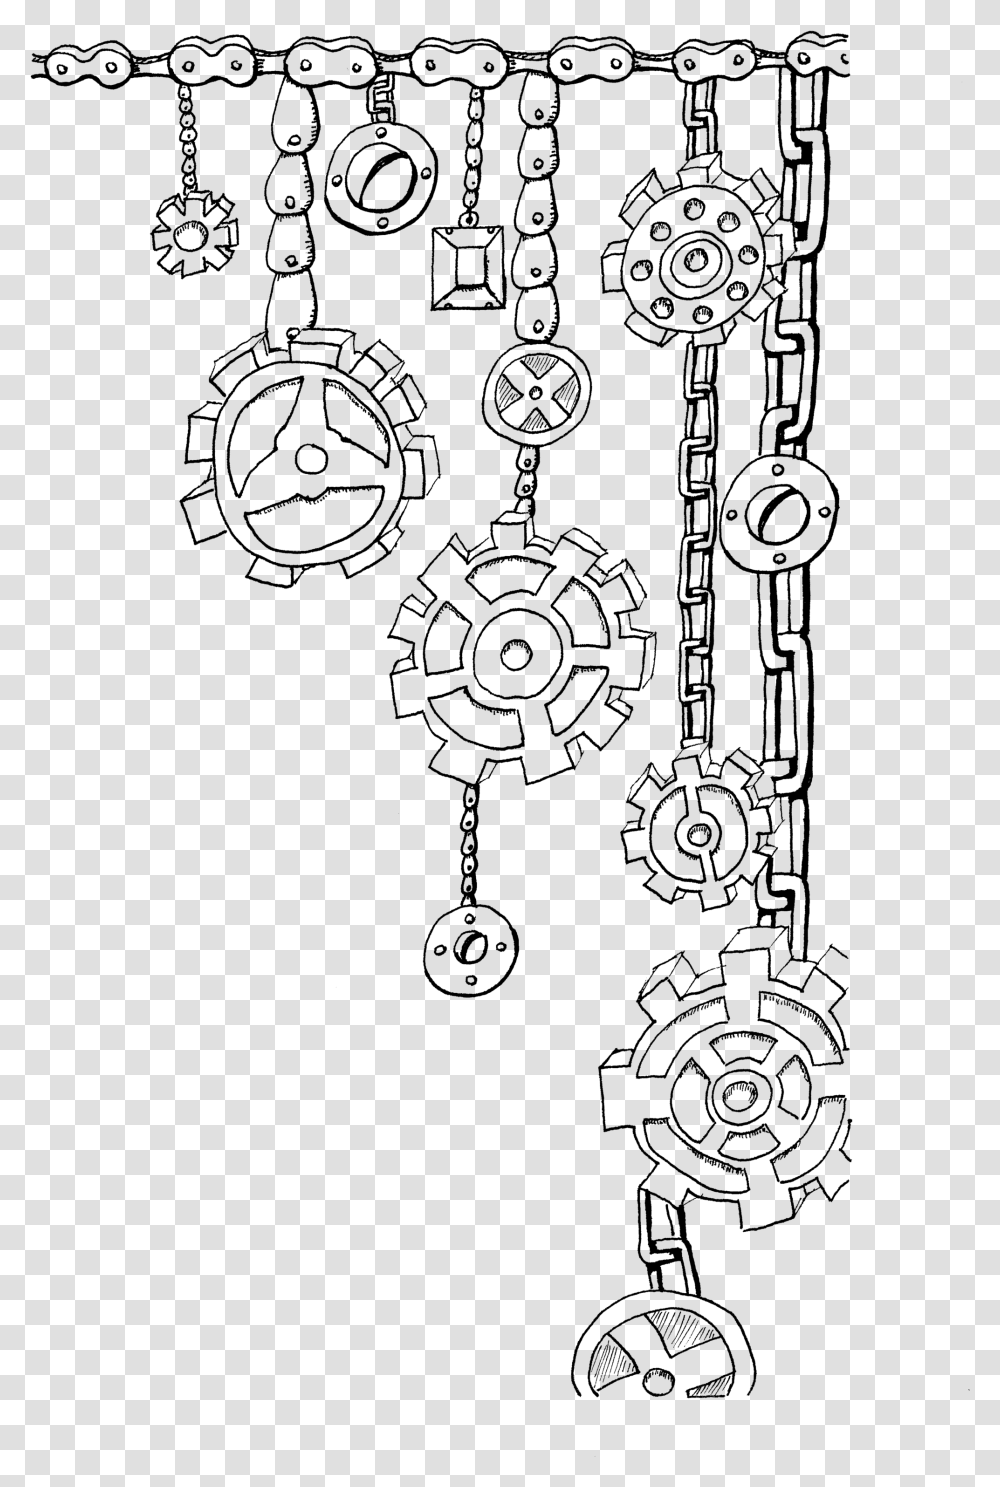 Charming Purplepoppet Clear Steampunk Gears And Cogs Drawing, Gray, World Of Warcraft Transparent Png